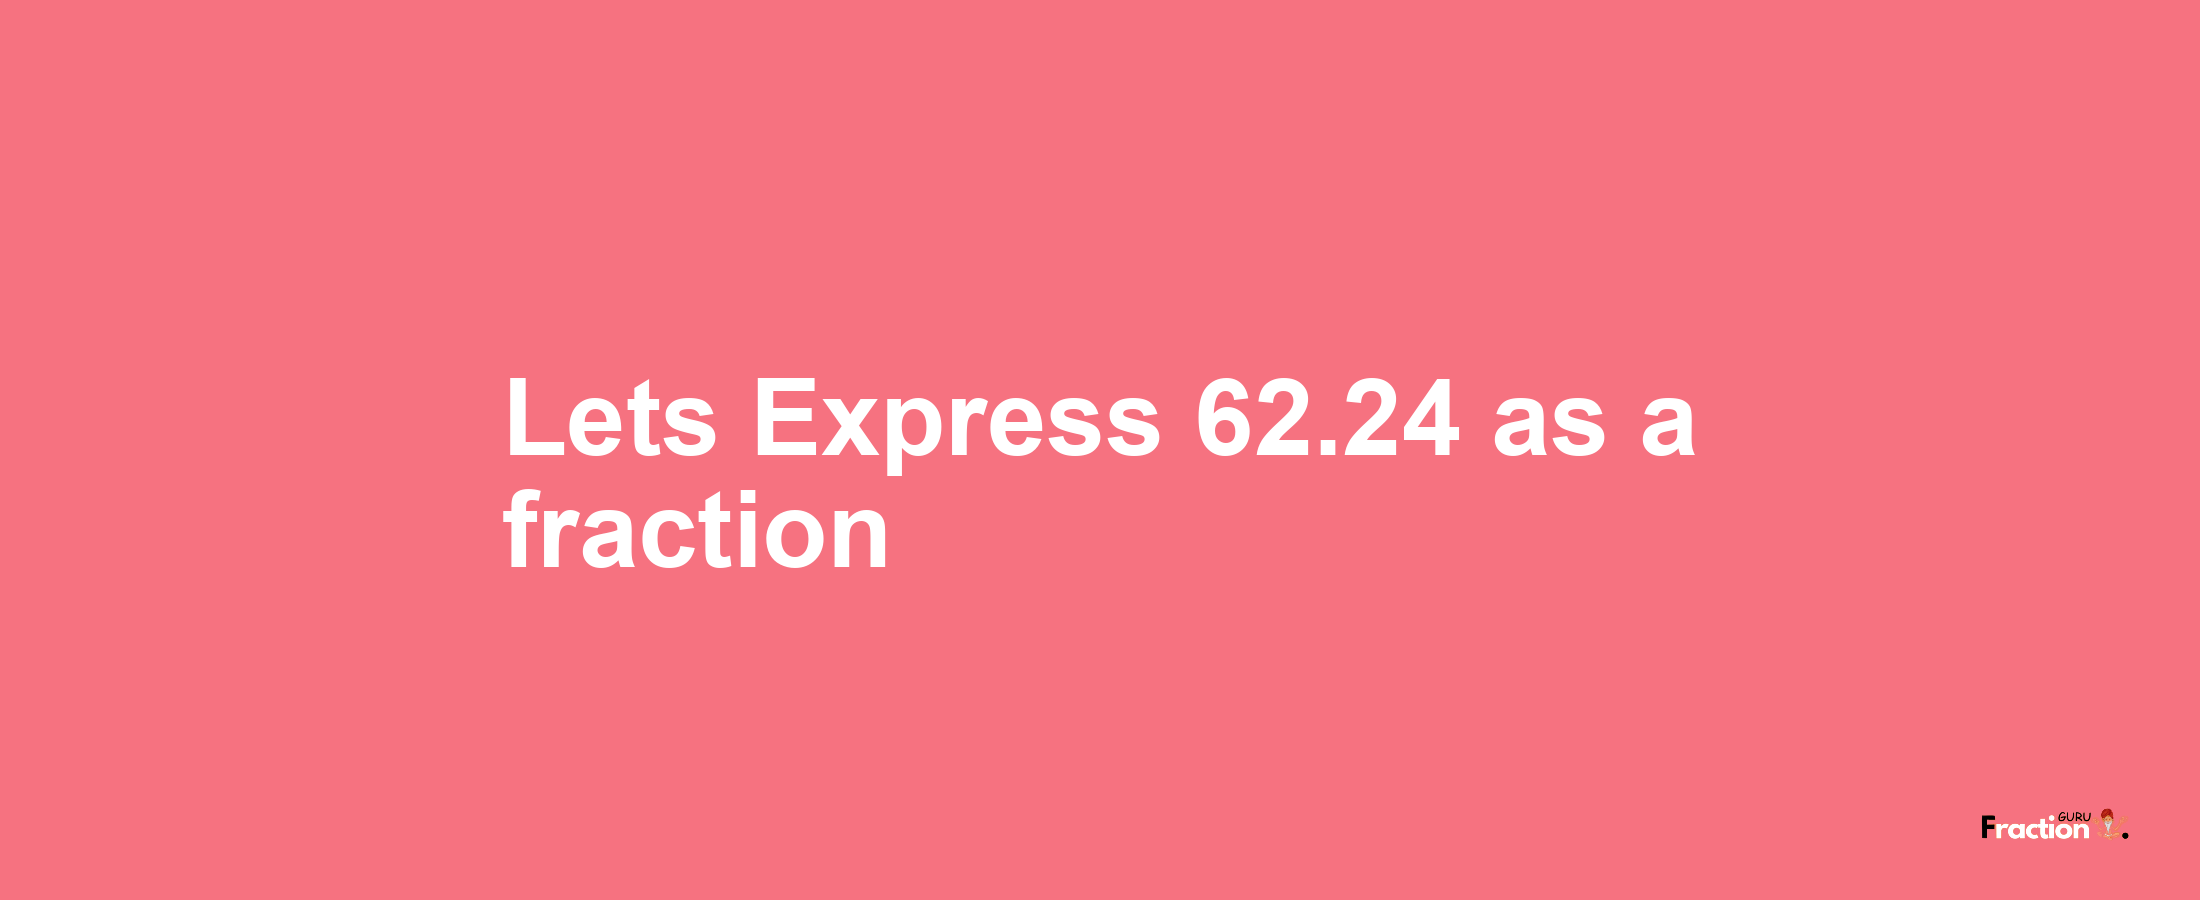 Lets Express 62.24 as afraction